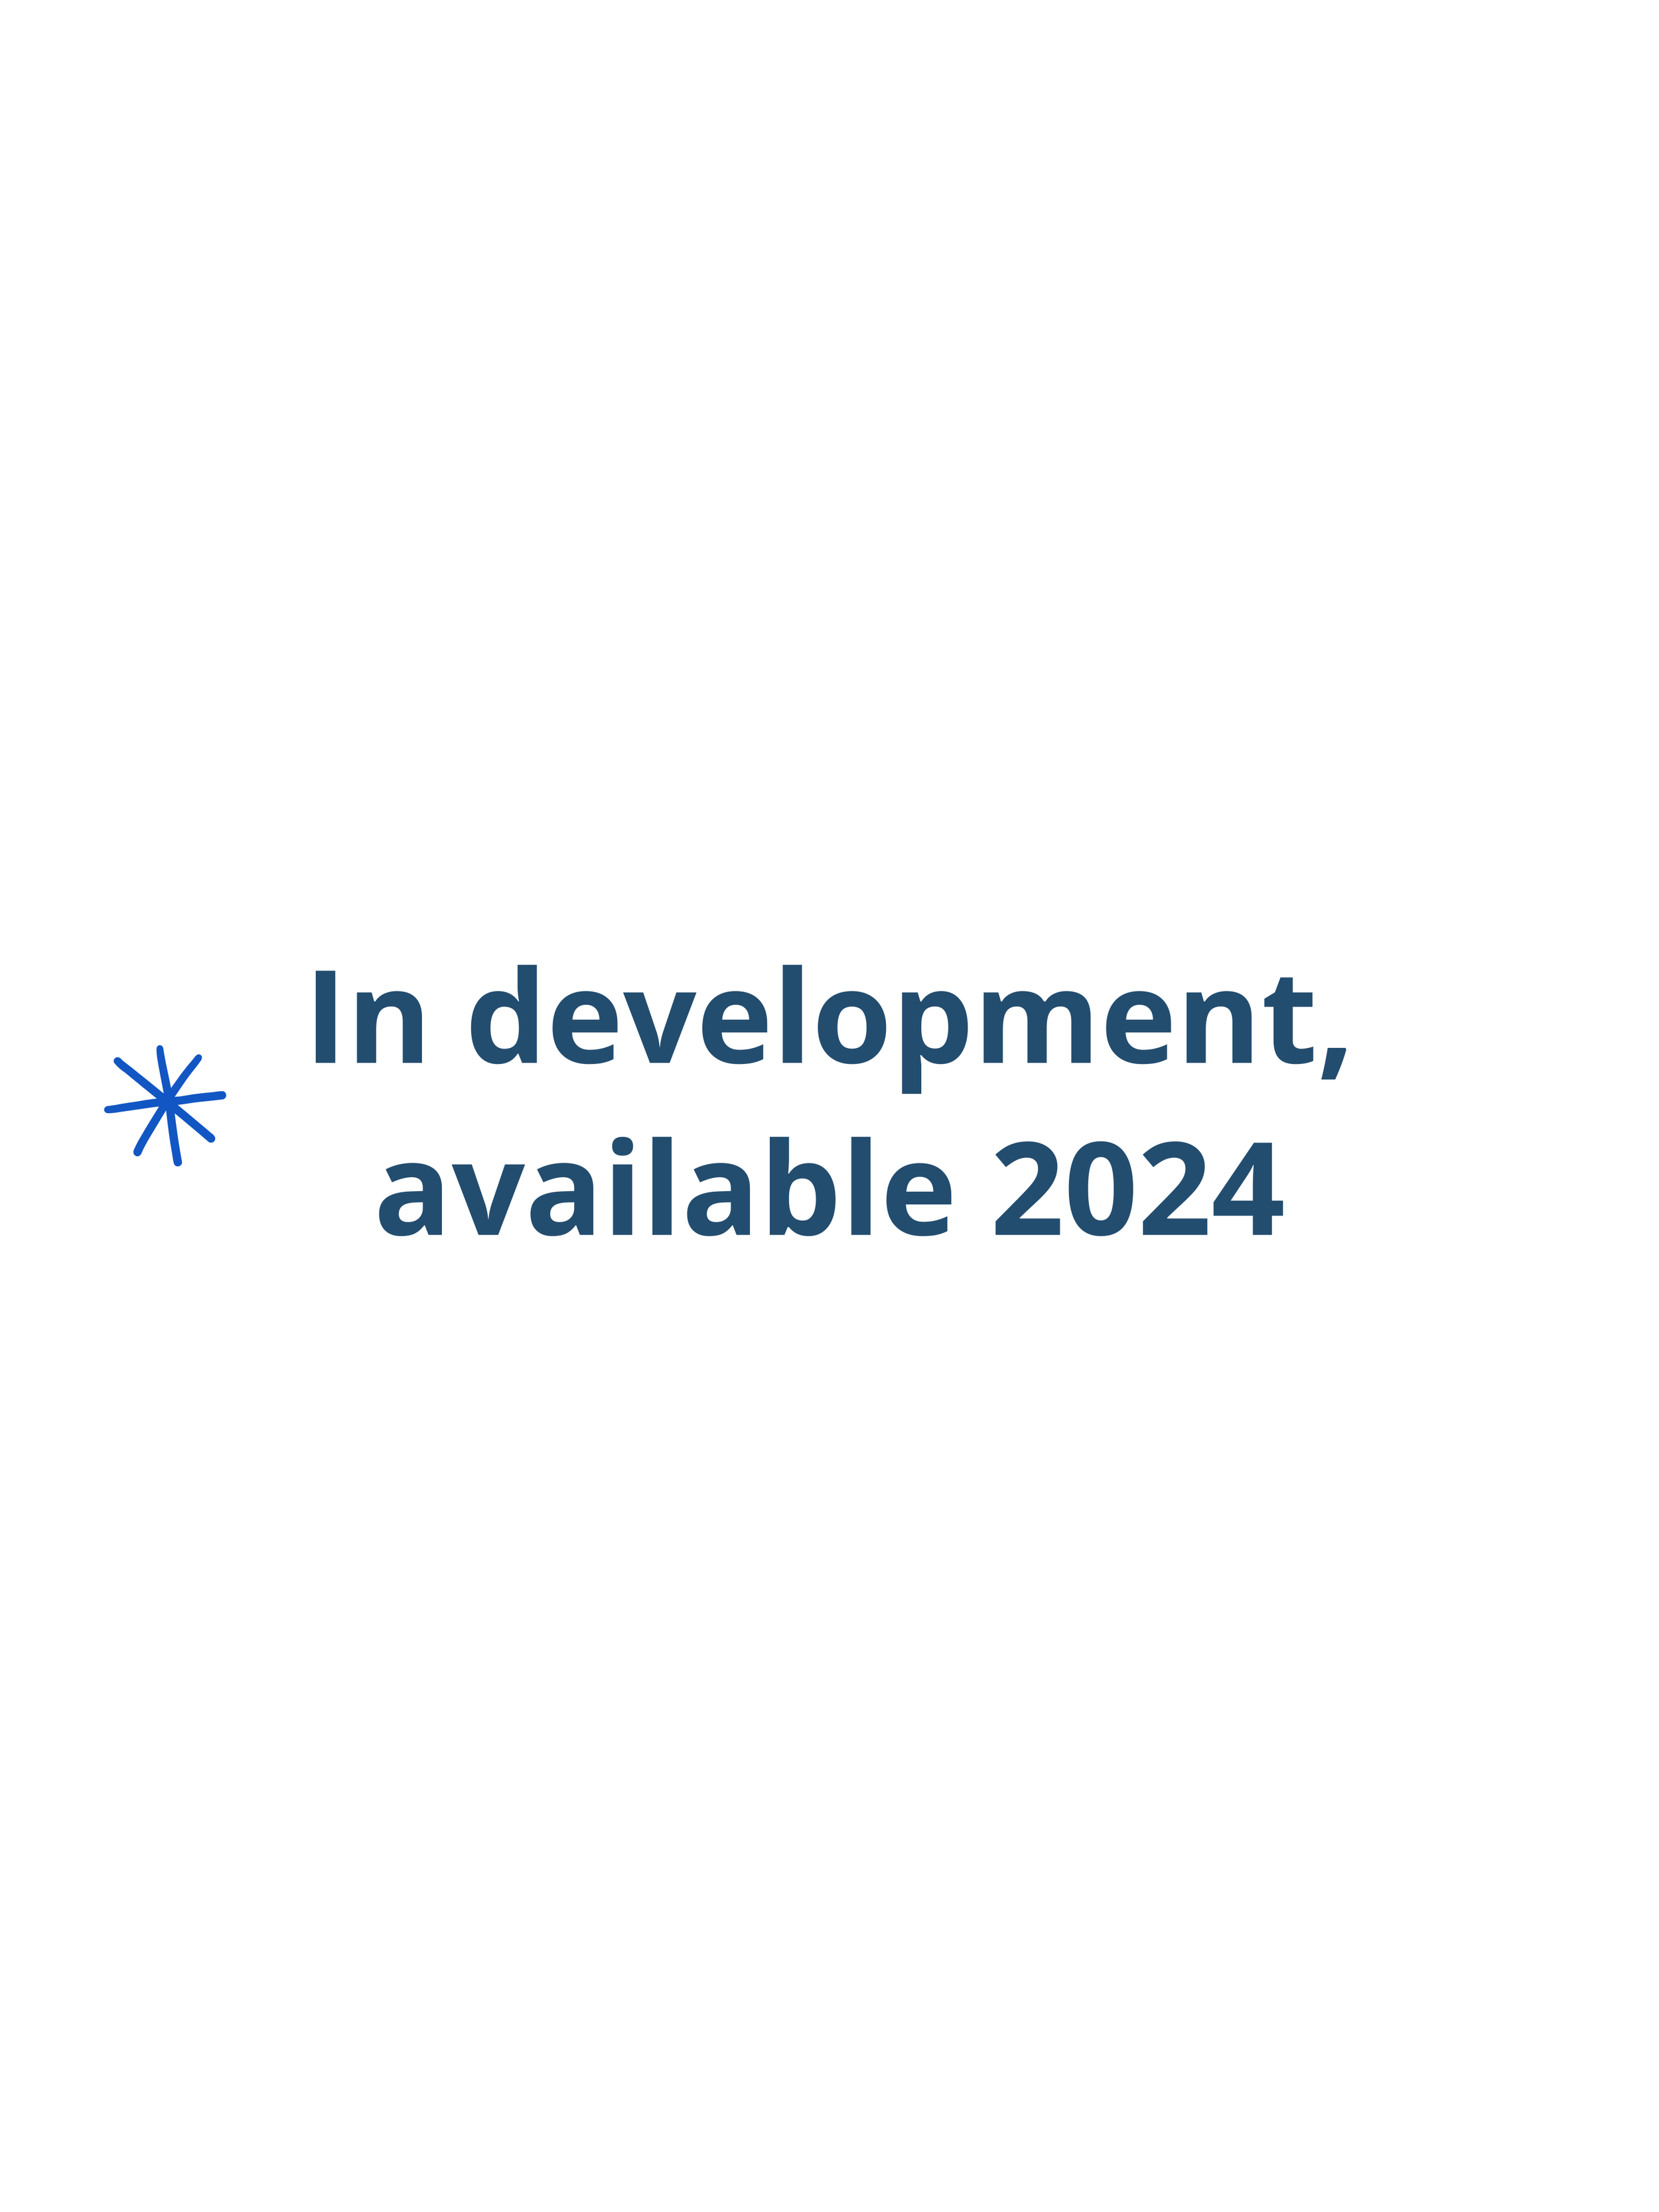 In development, available 2024.png